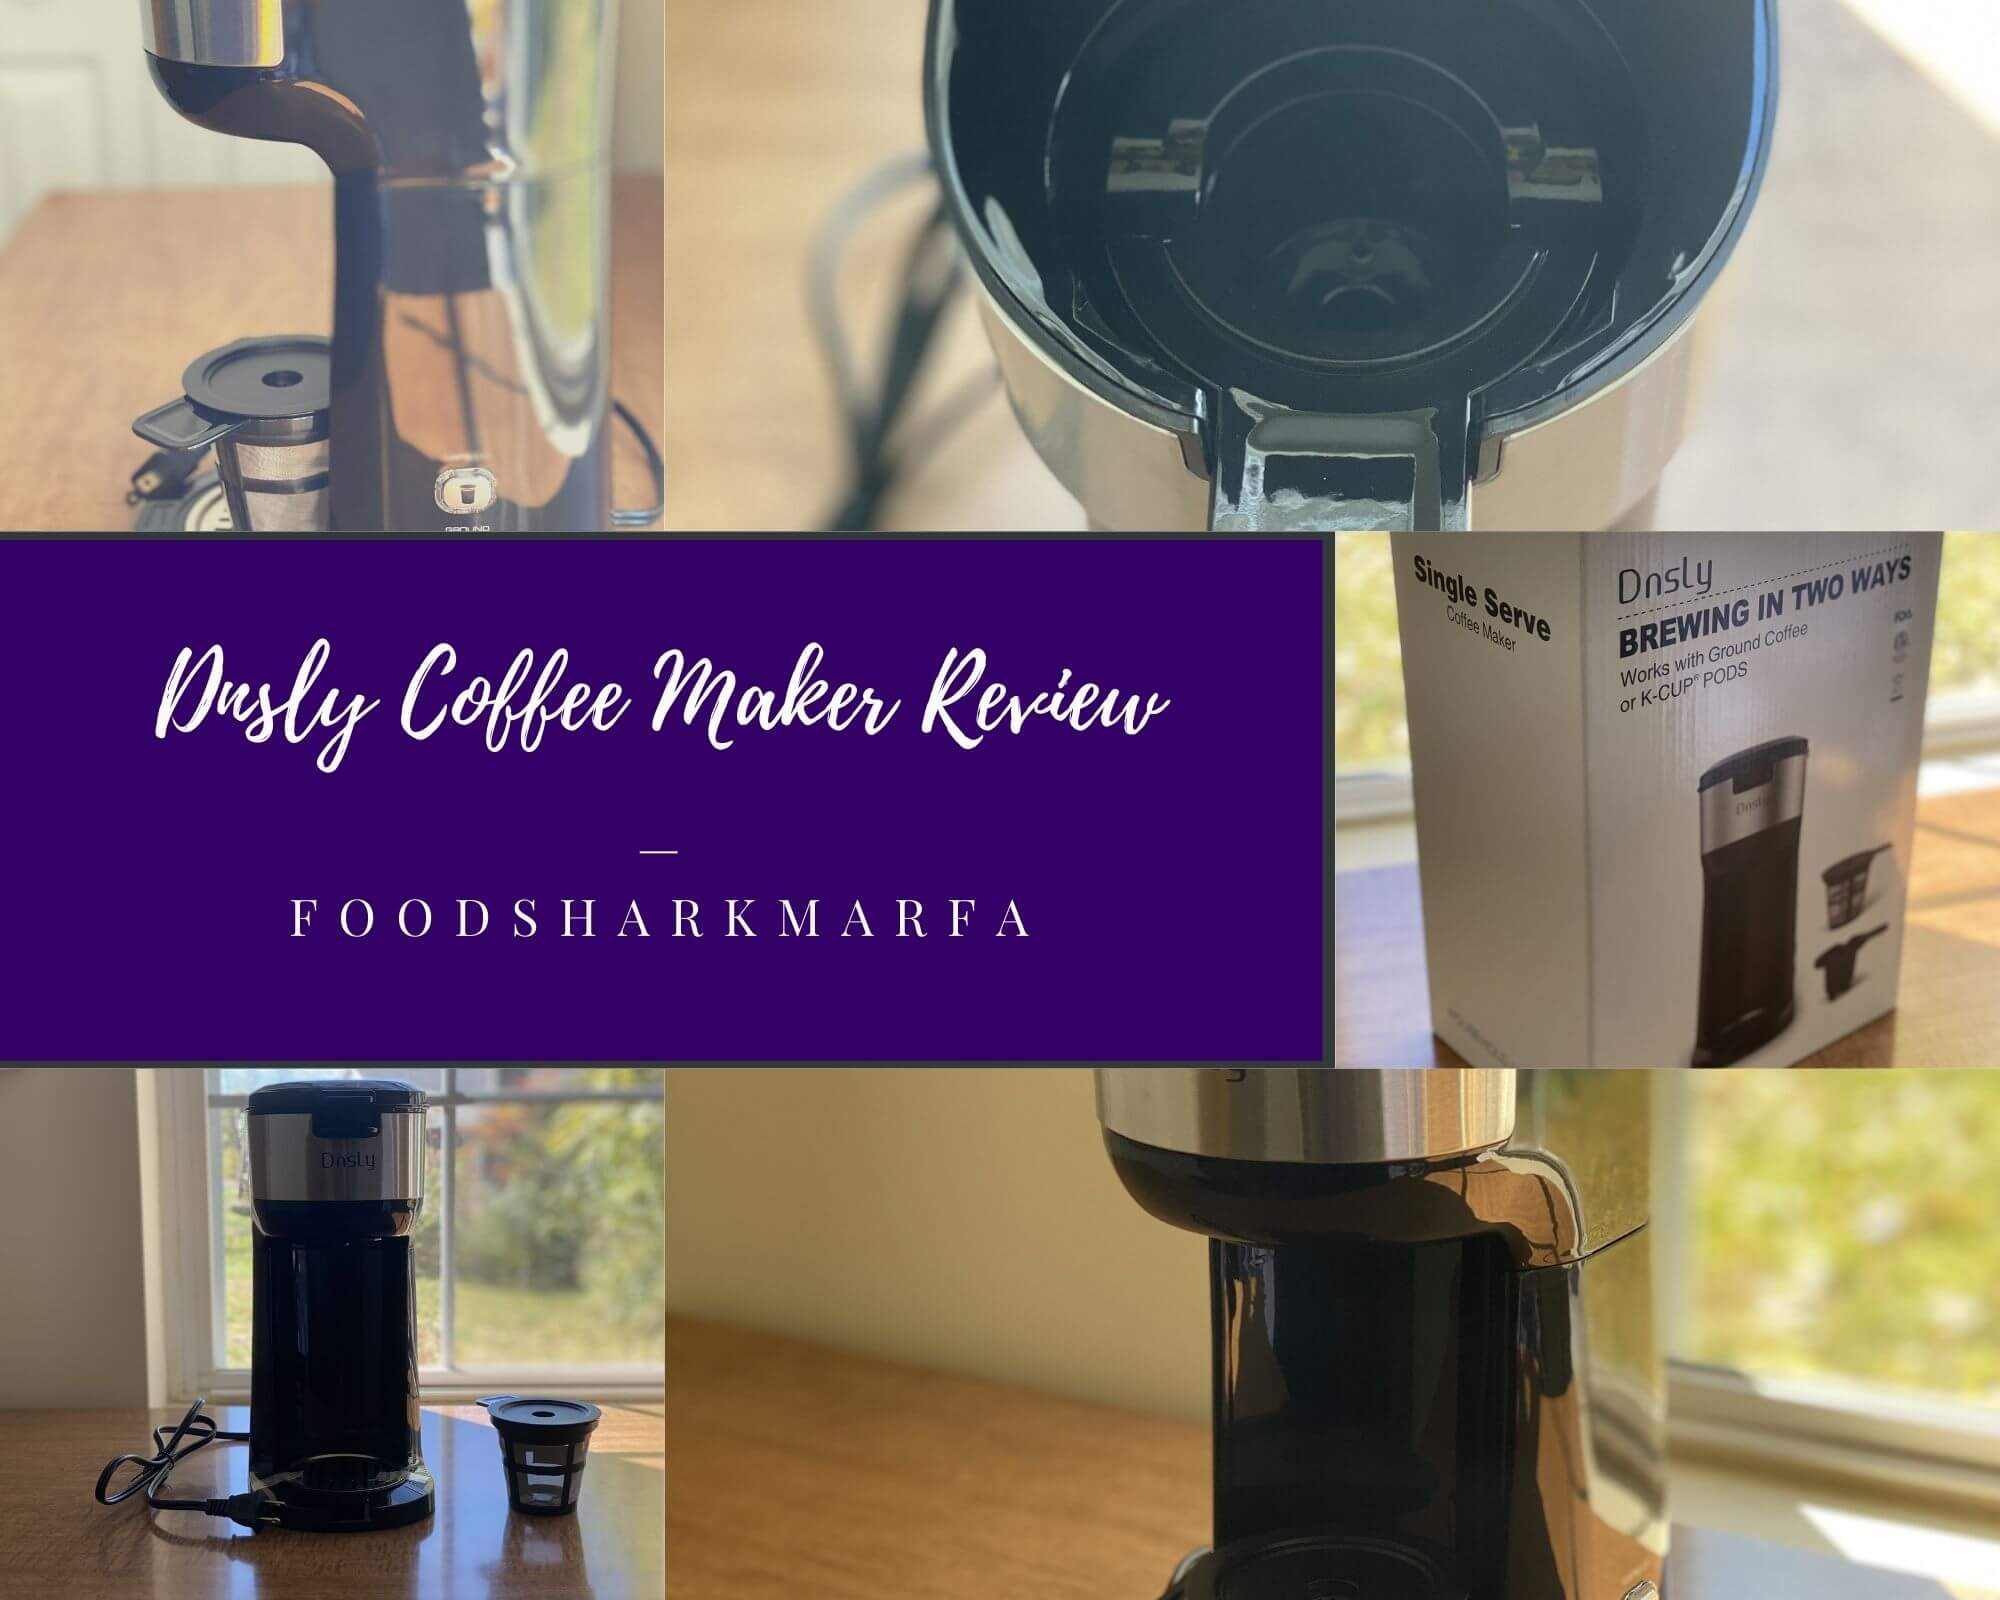 Dnsly Coffee Maker Review